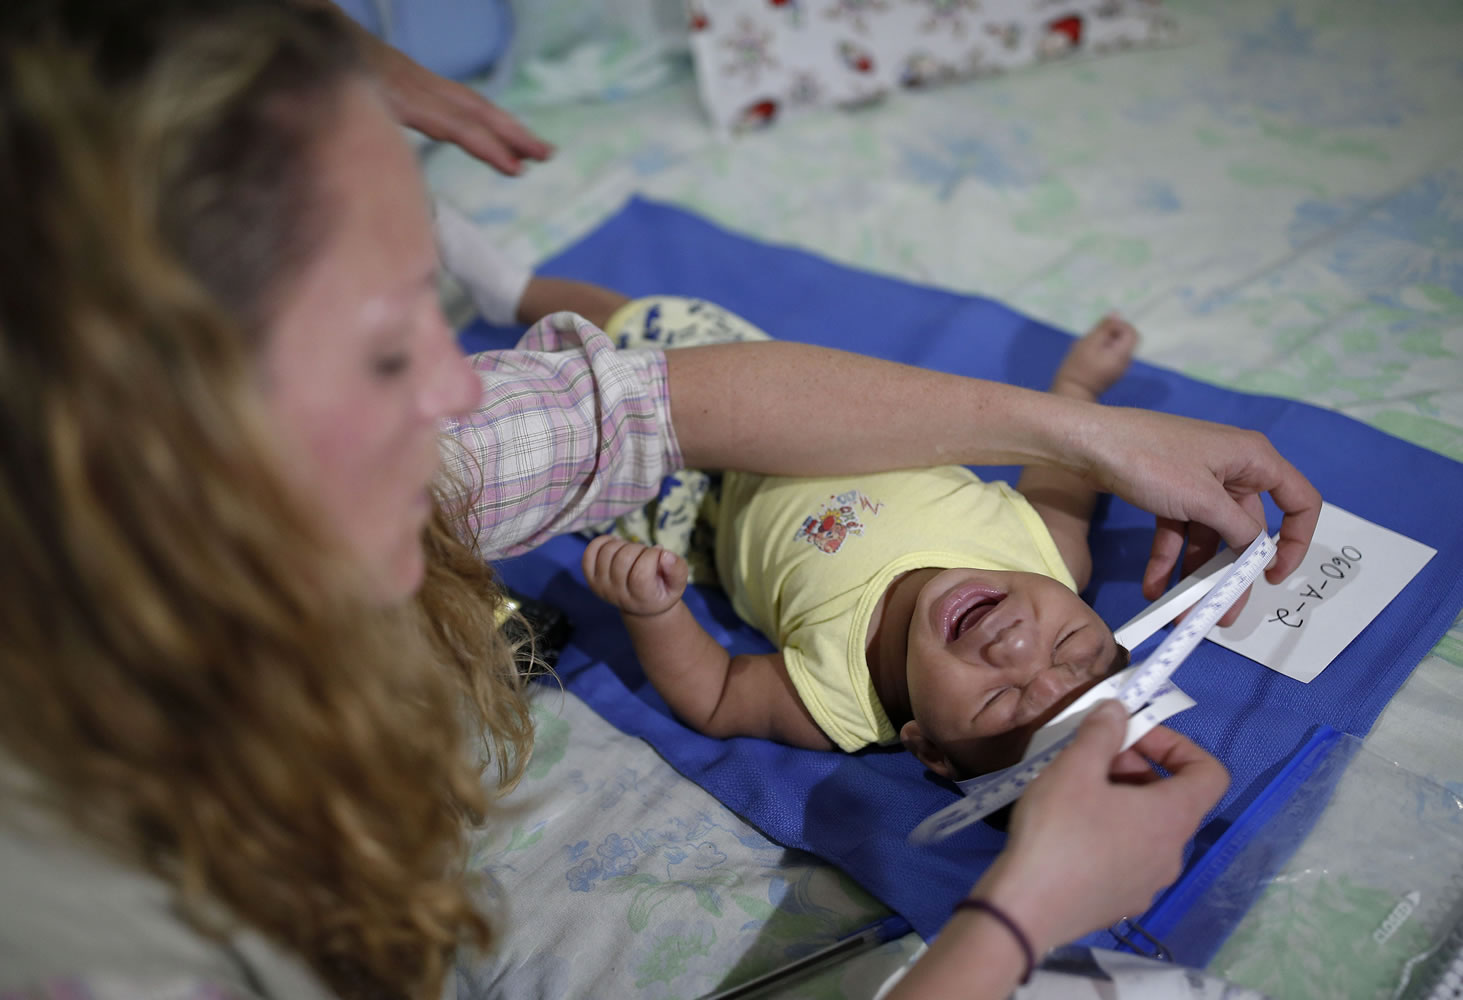 Pediatrician Alexia Harrist from the U.S. Centers for Disease Control and Prevention examines 3-month-old Shayde Henrique, who was born with microcephaly, Tuesday in Joao Pessoa, Brazil.